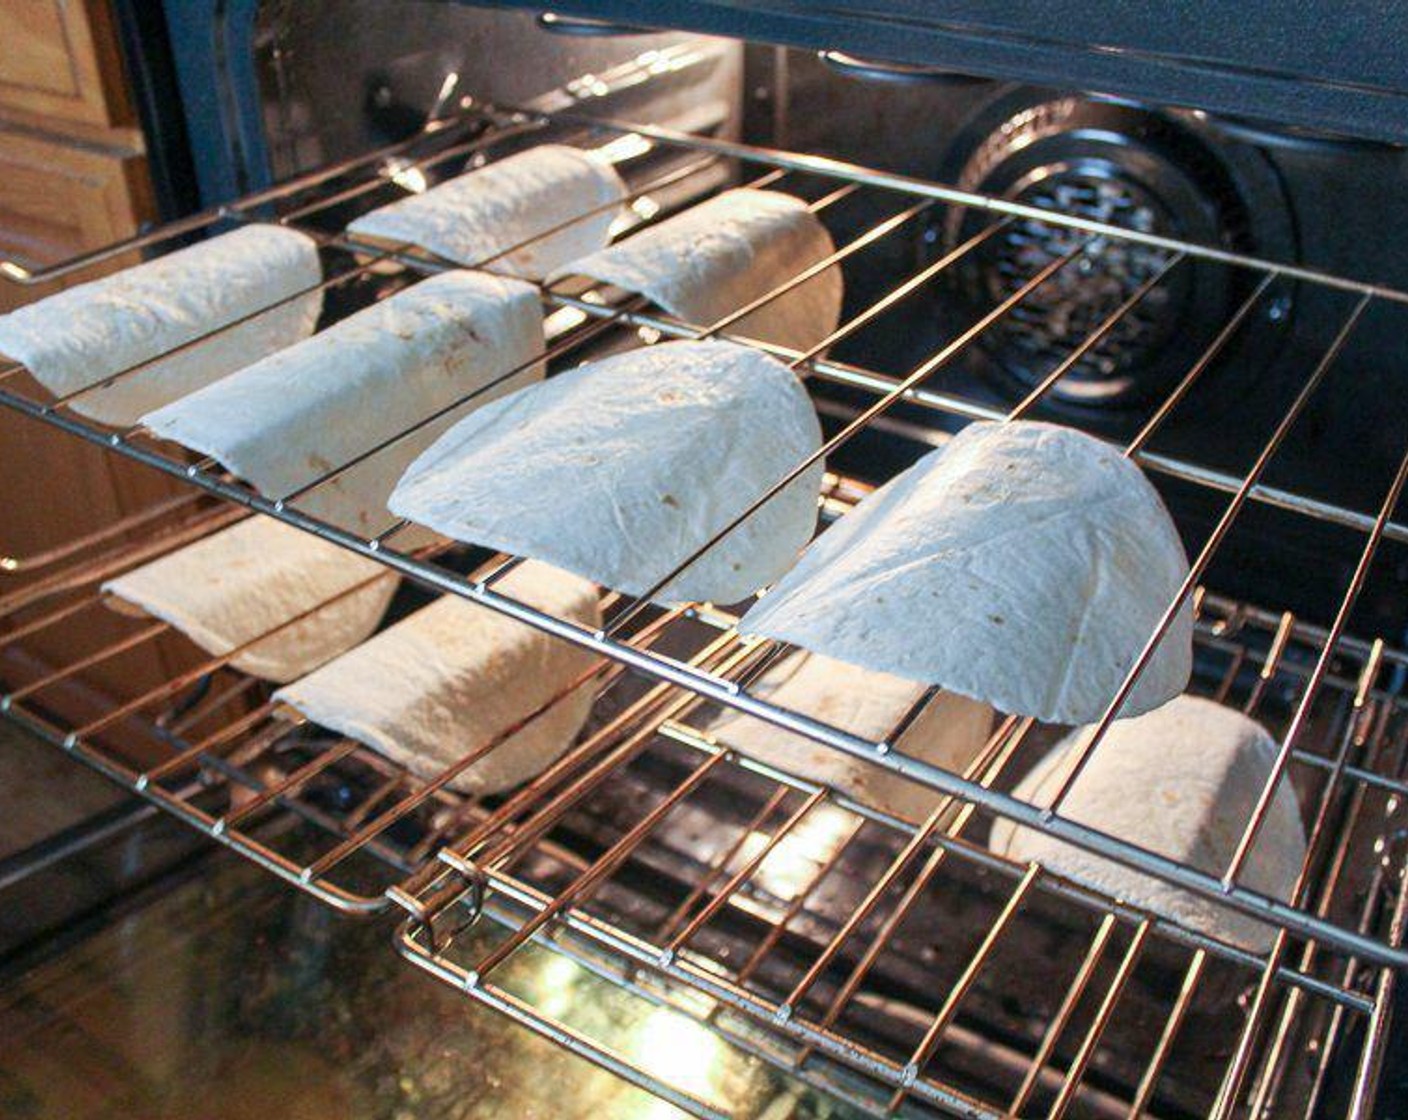 step 2 Once oven is warm, lightly spray one side of each of the 6-Inch Flour Tortillas (10) and drape carefully over the oven rack. Gently press them down into a taco shape. Bake for about 7 minutes, until the shells are golden brown and crispy. Do not over-bake, since they will get more firm as they cool.